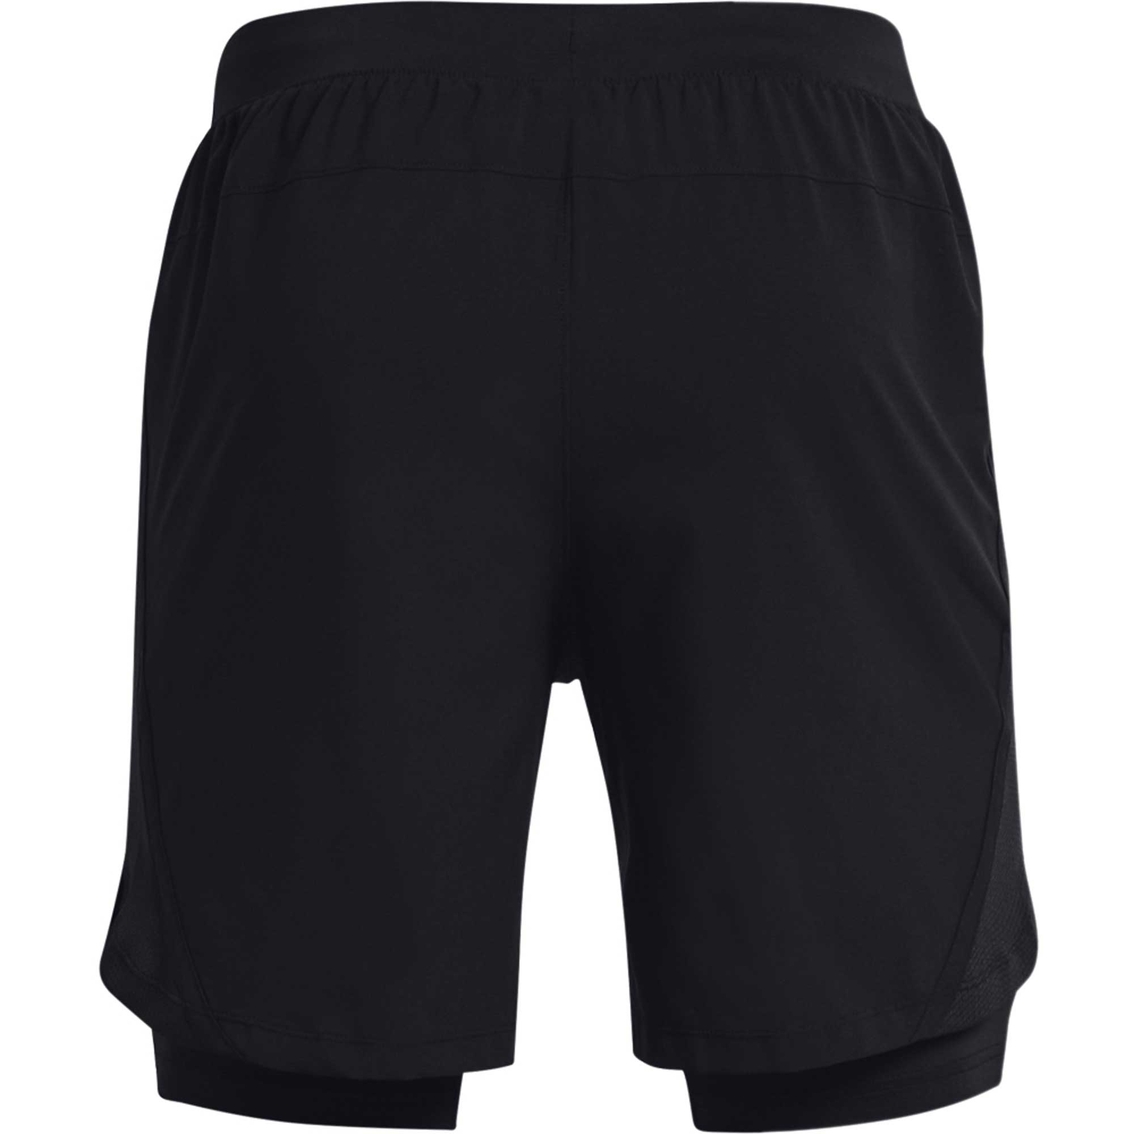 Under Armour Launch Run 2-in-1 Shorts - Image 7 of 7